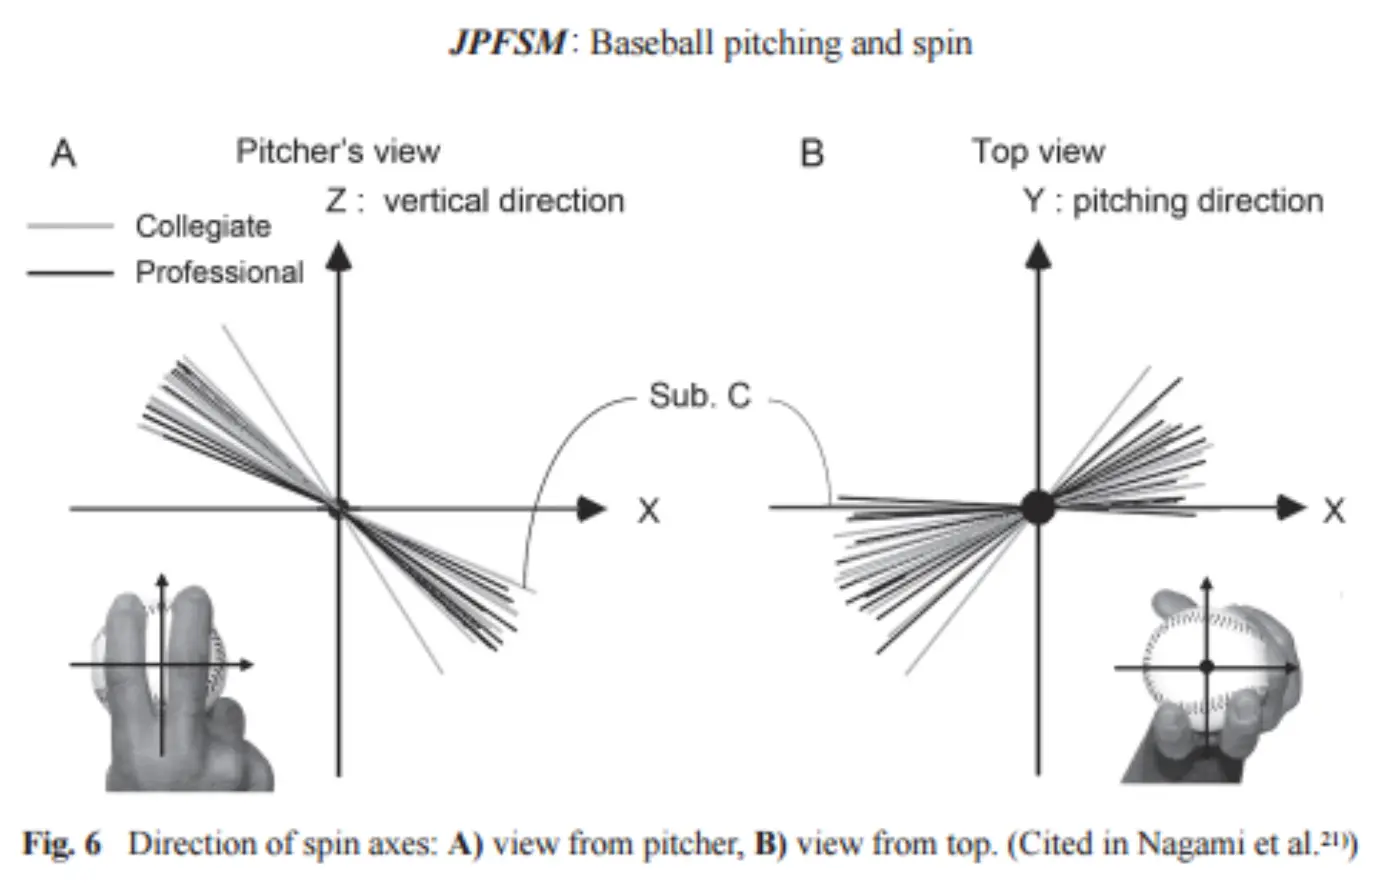 Spin Rate Part II: Spin Axis & Useful Spin - Driveline Baseball